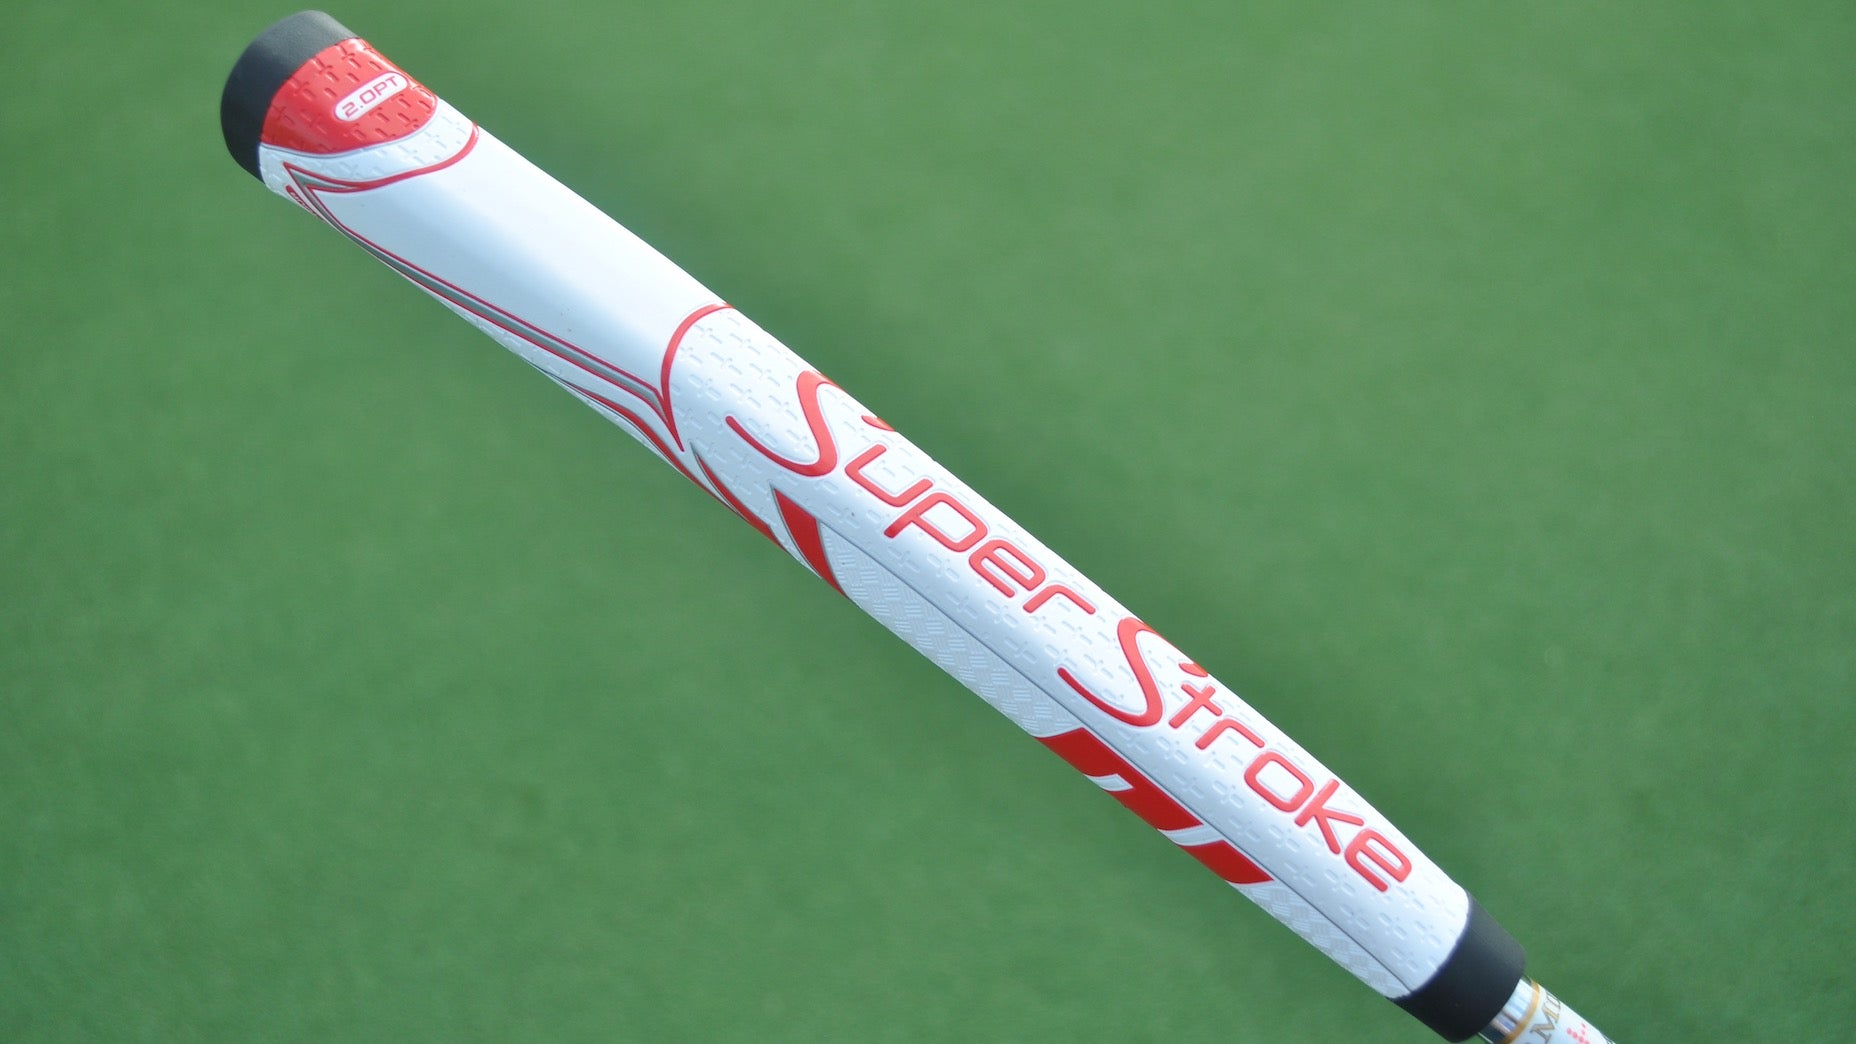 pga tour players using superstroke grips